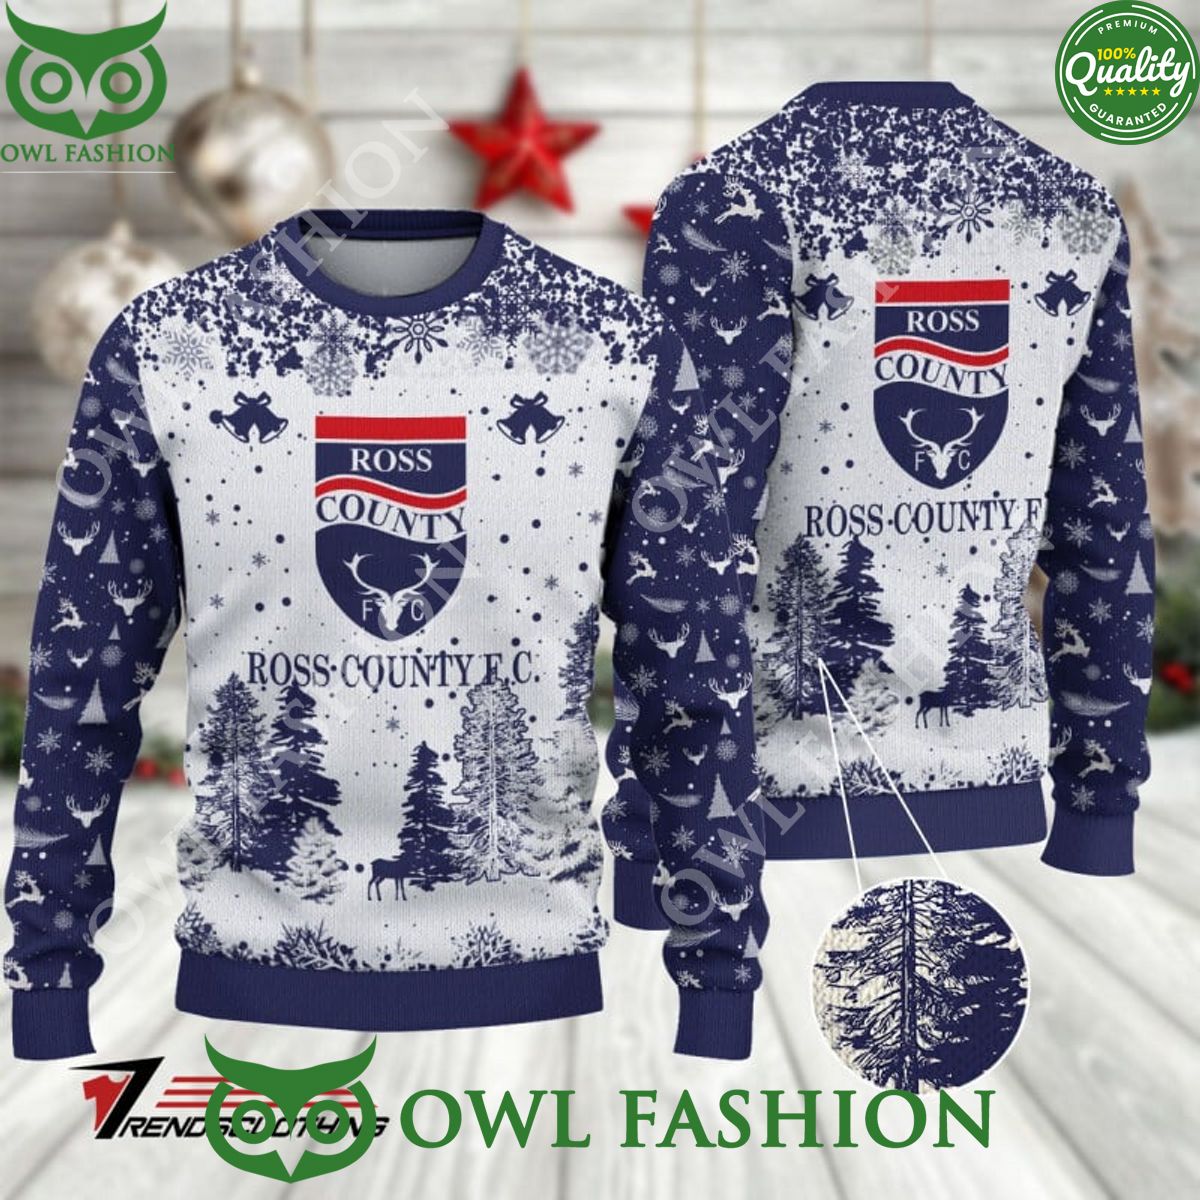 Ross County F.C. SPFL Scottish Snow Fall Pine Ugly sweater jumper